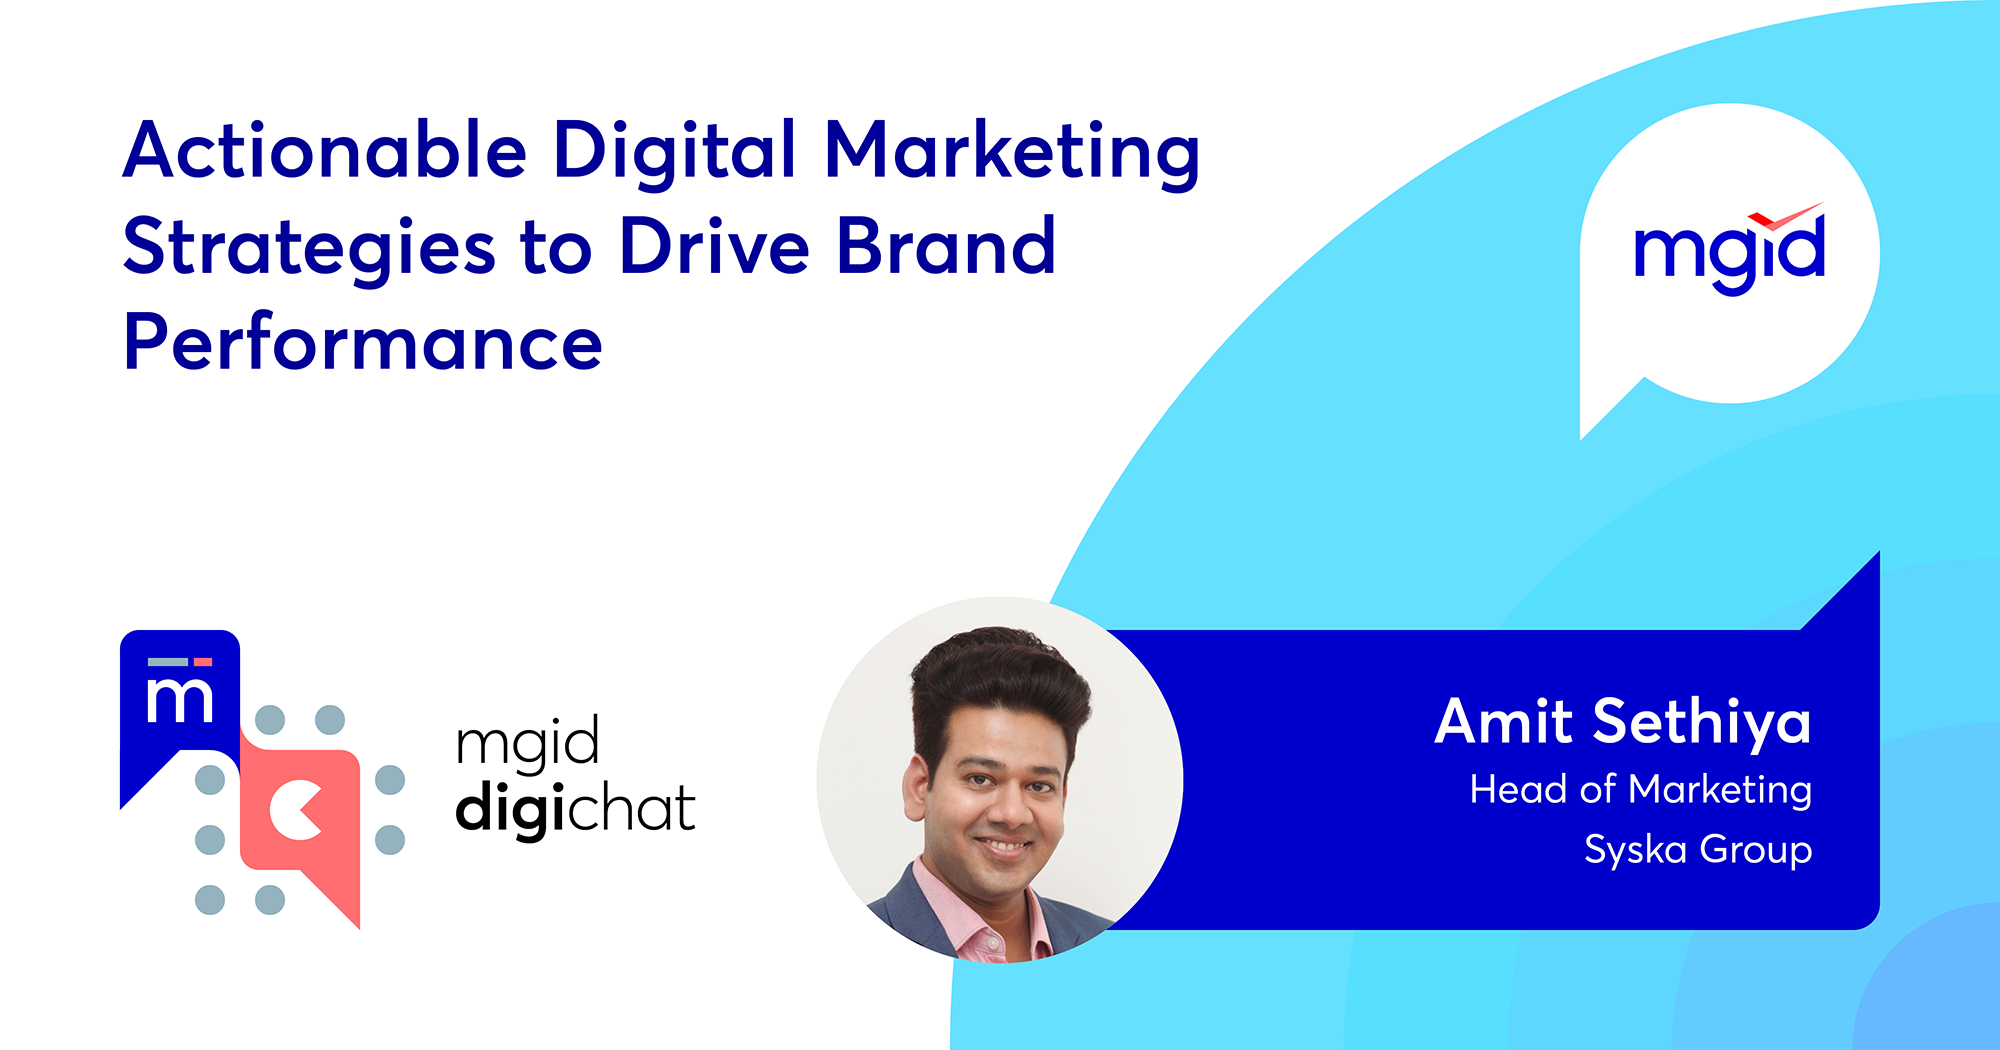 Actionable Digital Marketing Strategies to Drive Brand Performance